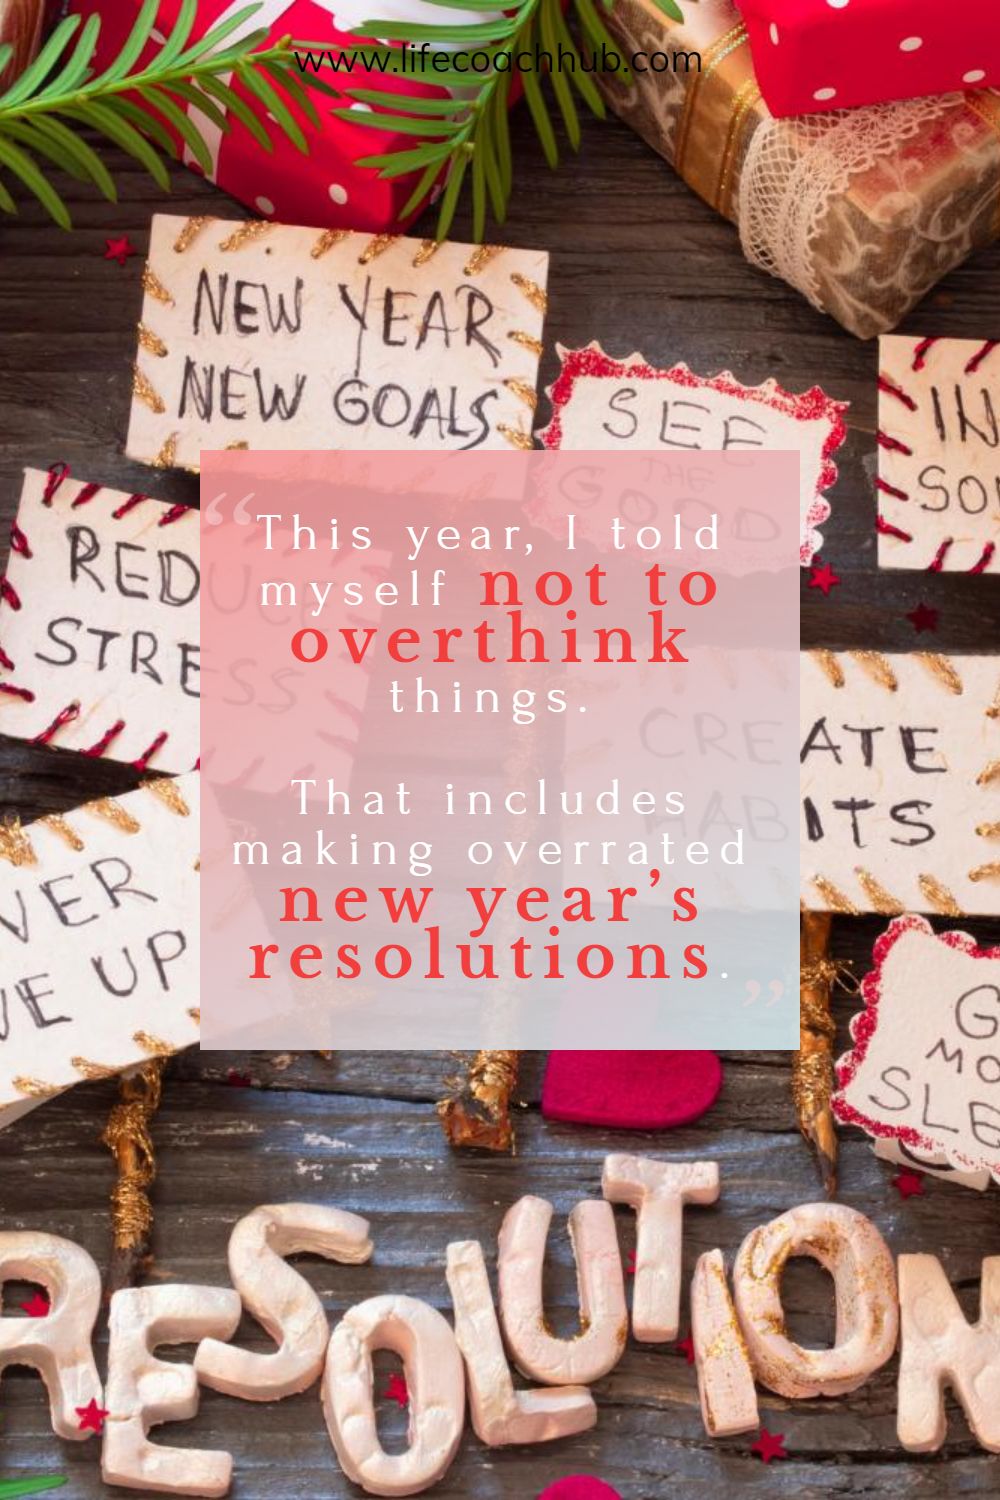 Funny new year's resolutions